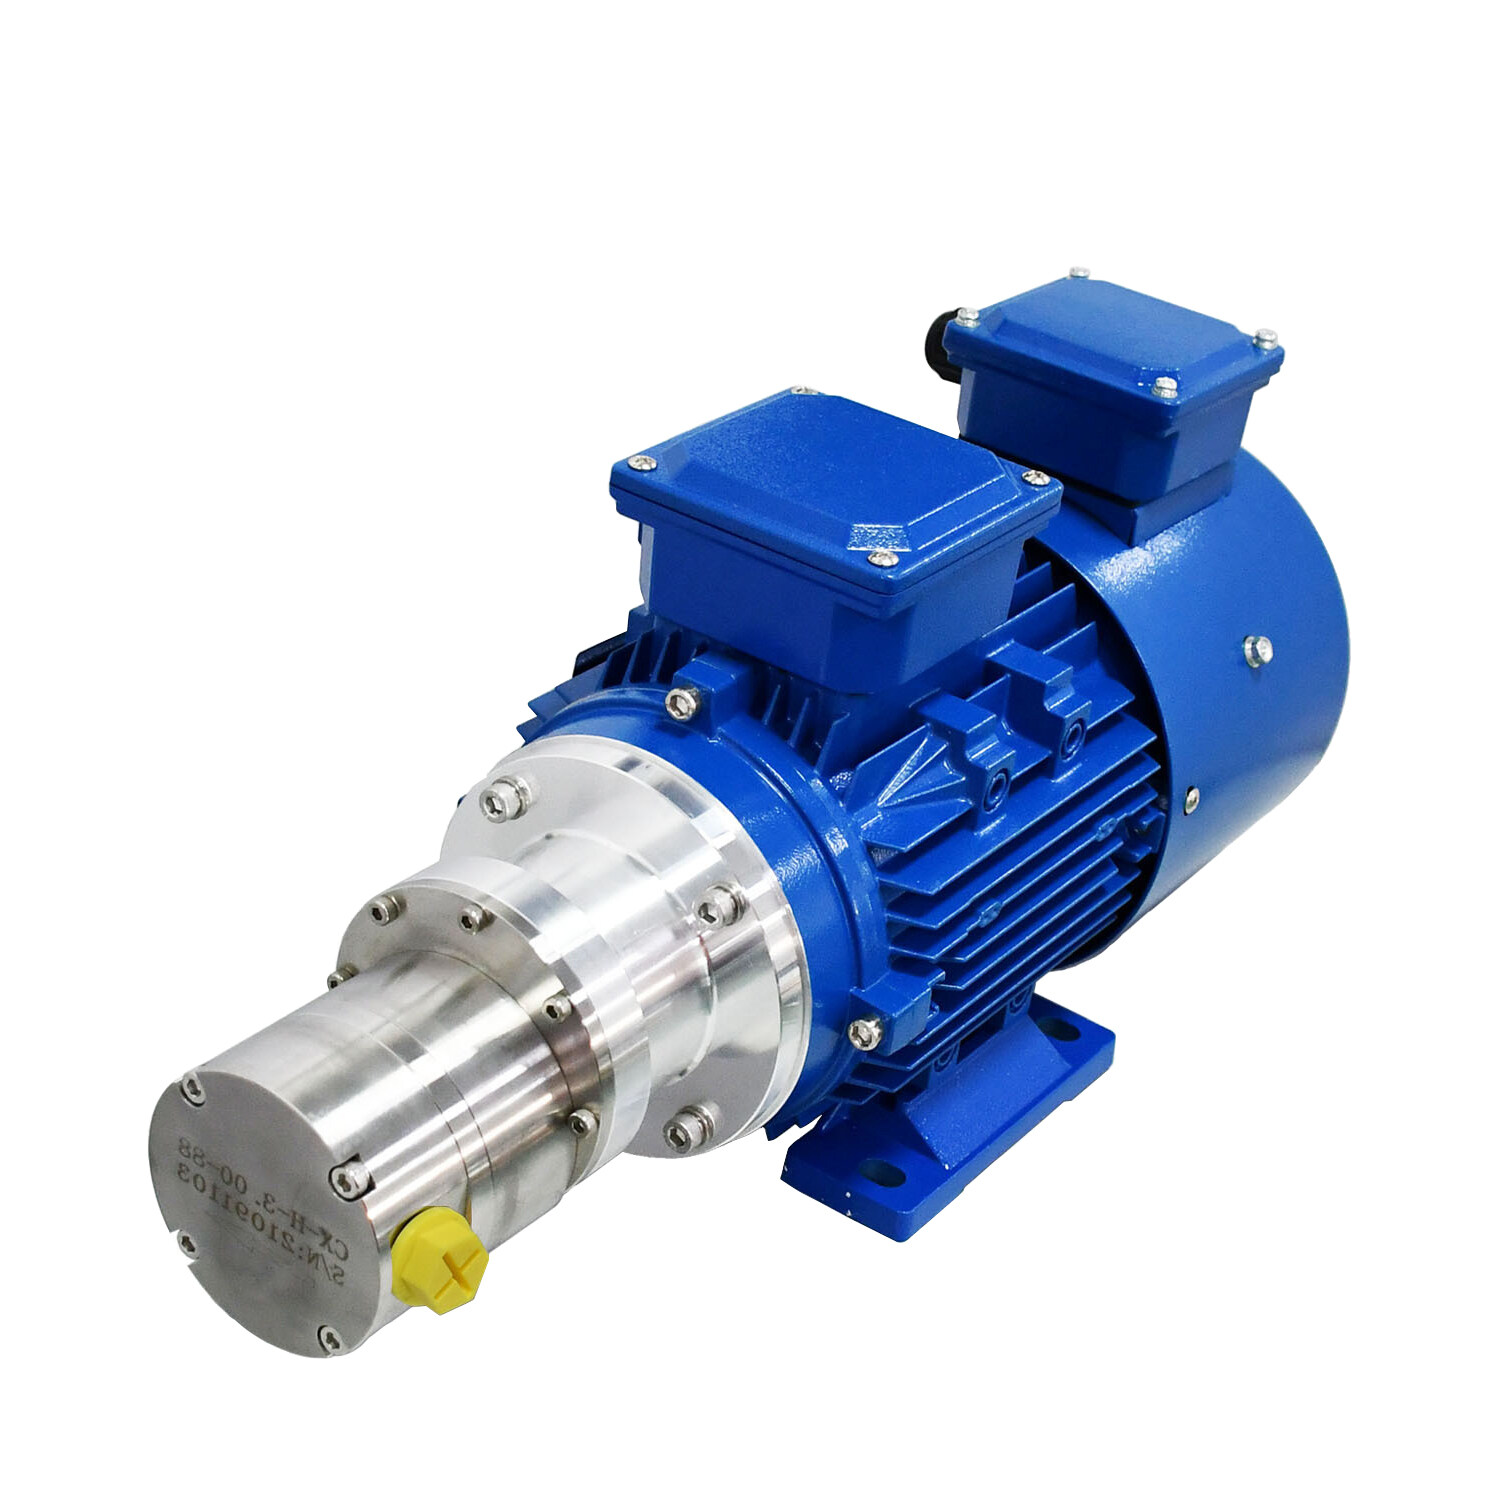 Sanitary Centrifugal Pumps: The Ultimate Solution for Hygienic Fluid Transfer